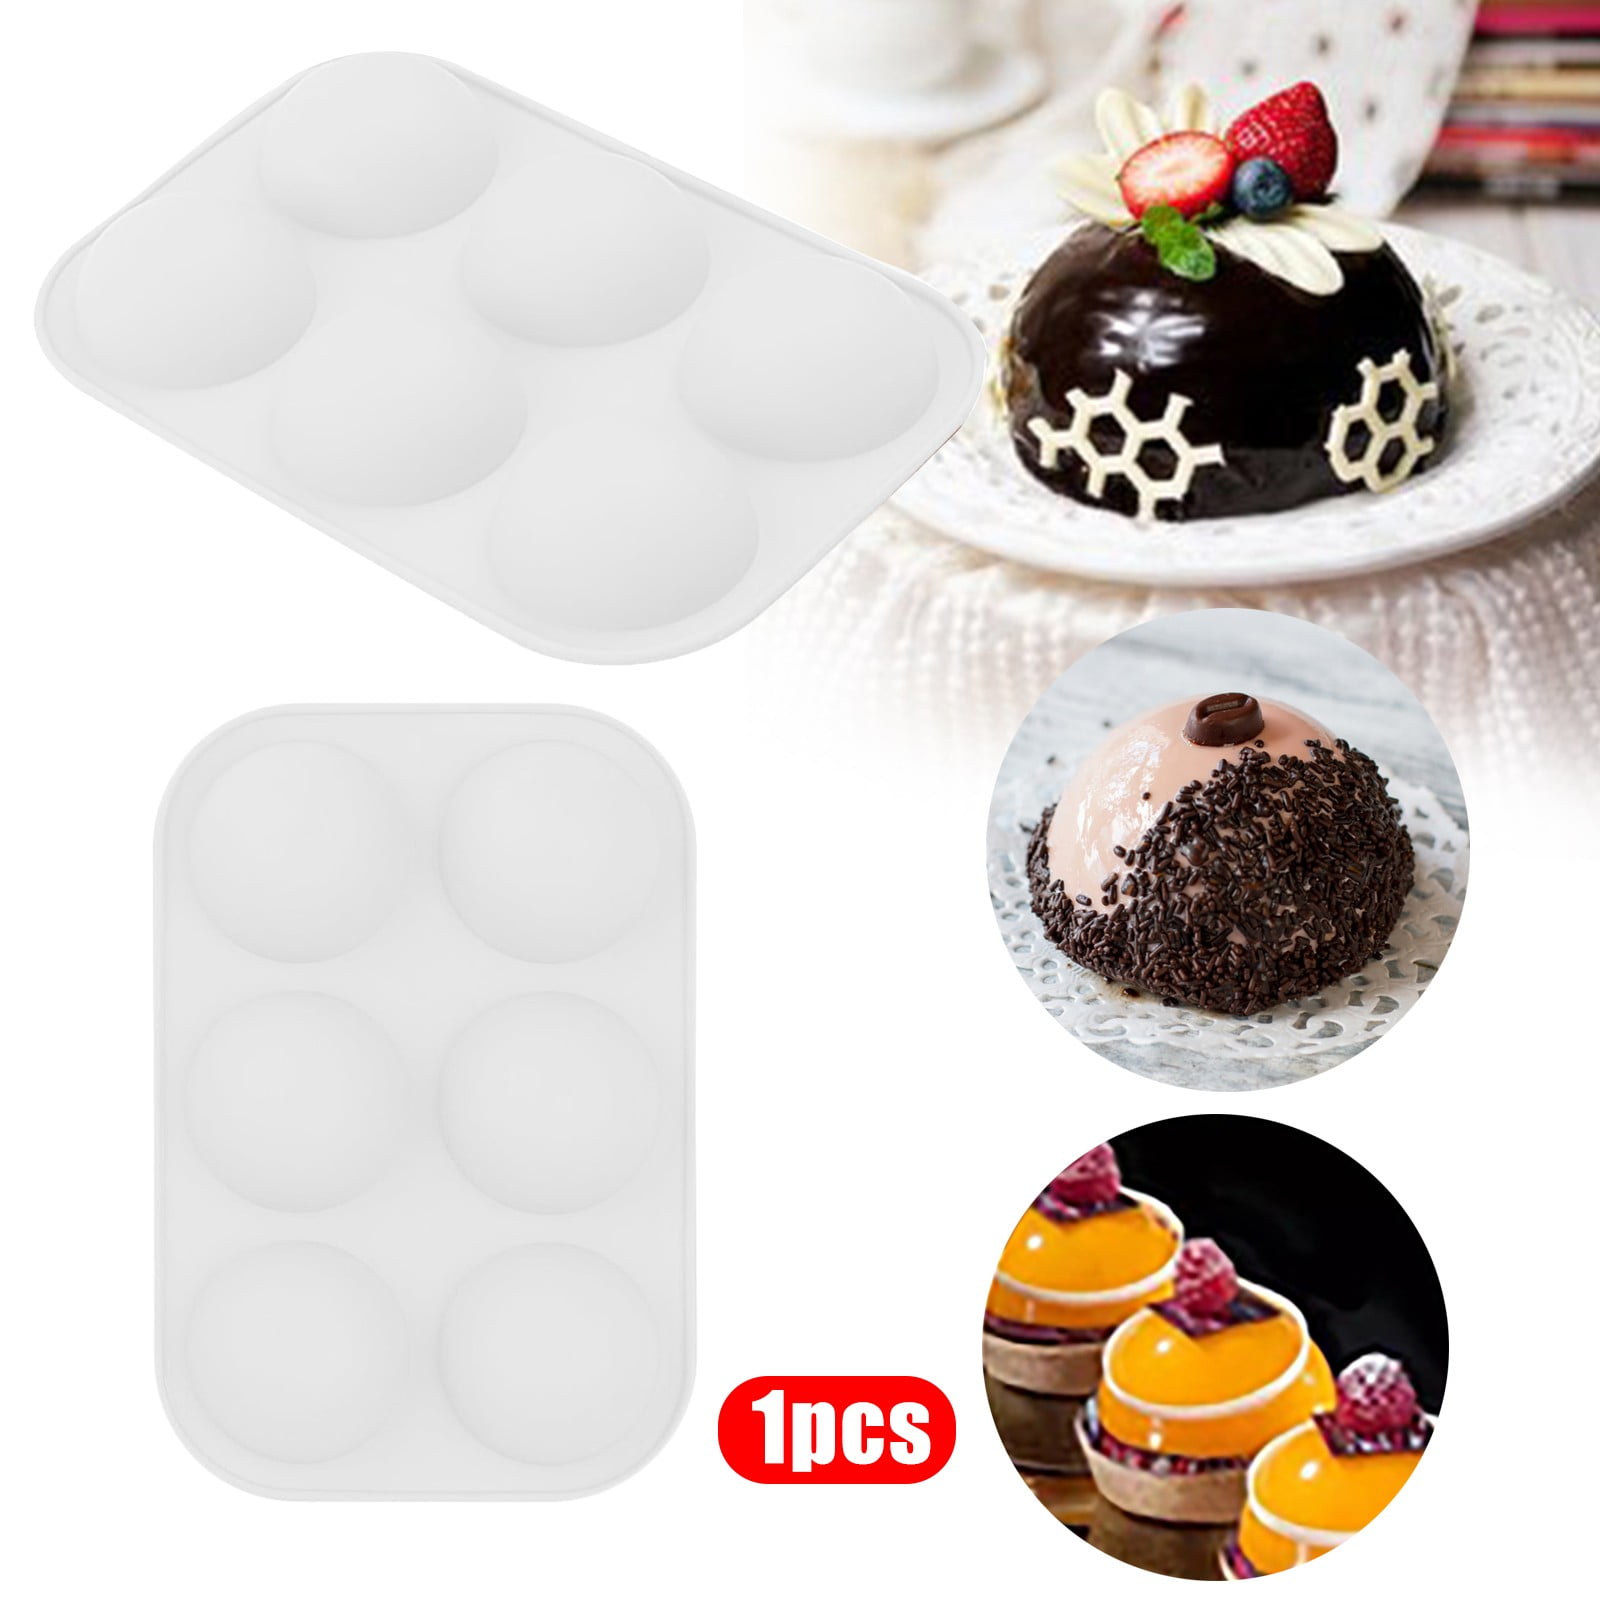 10pcs Silicone Star Cake Pudding Chocolate Mold Cup Muffin Baking Molds M k7ds 